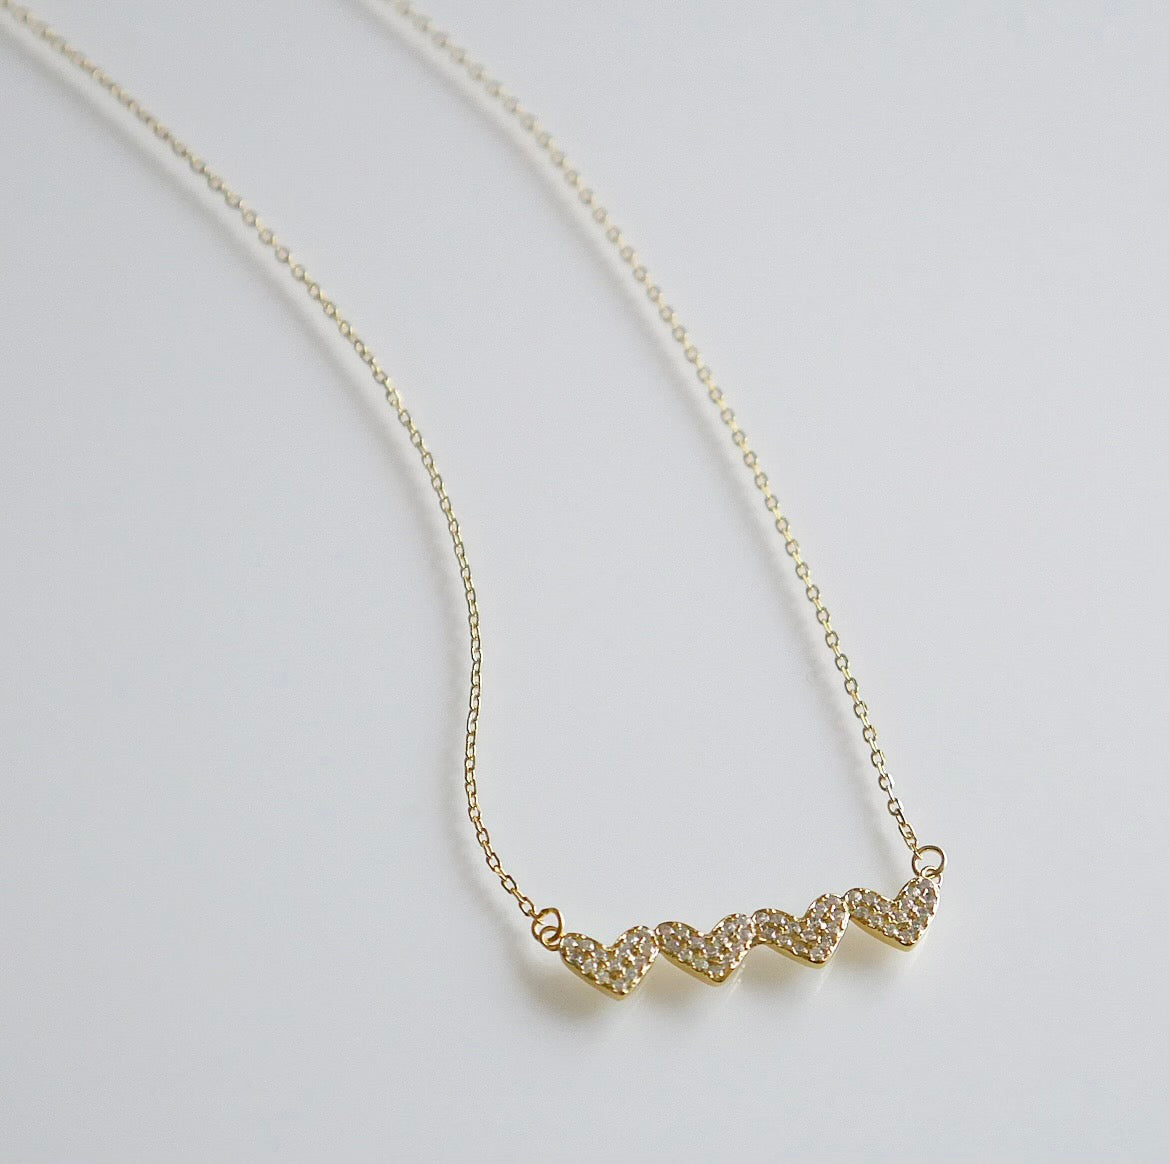 necklace, silver necklaces, heart necklaces, tiny heart necklaces, dainty necklace, sterling silver necklaces, rhinestone necklaces, designer jewelry, dainty heart necklaces, fashion jewelry, designer jewelry, zircon necklace , hypoallergenic necklaces, affordable jewelry, tarnish free jewelry, kesley jewelry, birthdya gifts, anniversary gifts, holiday gifts, heart necklaces, trending jewelry